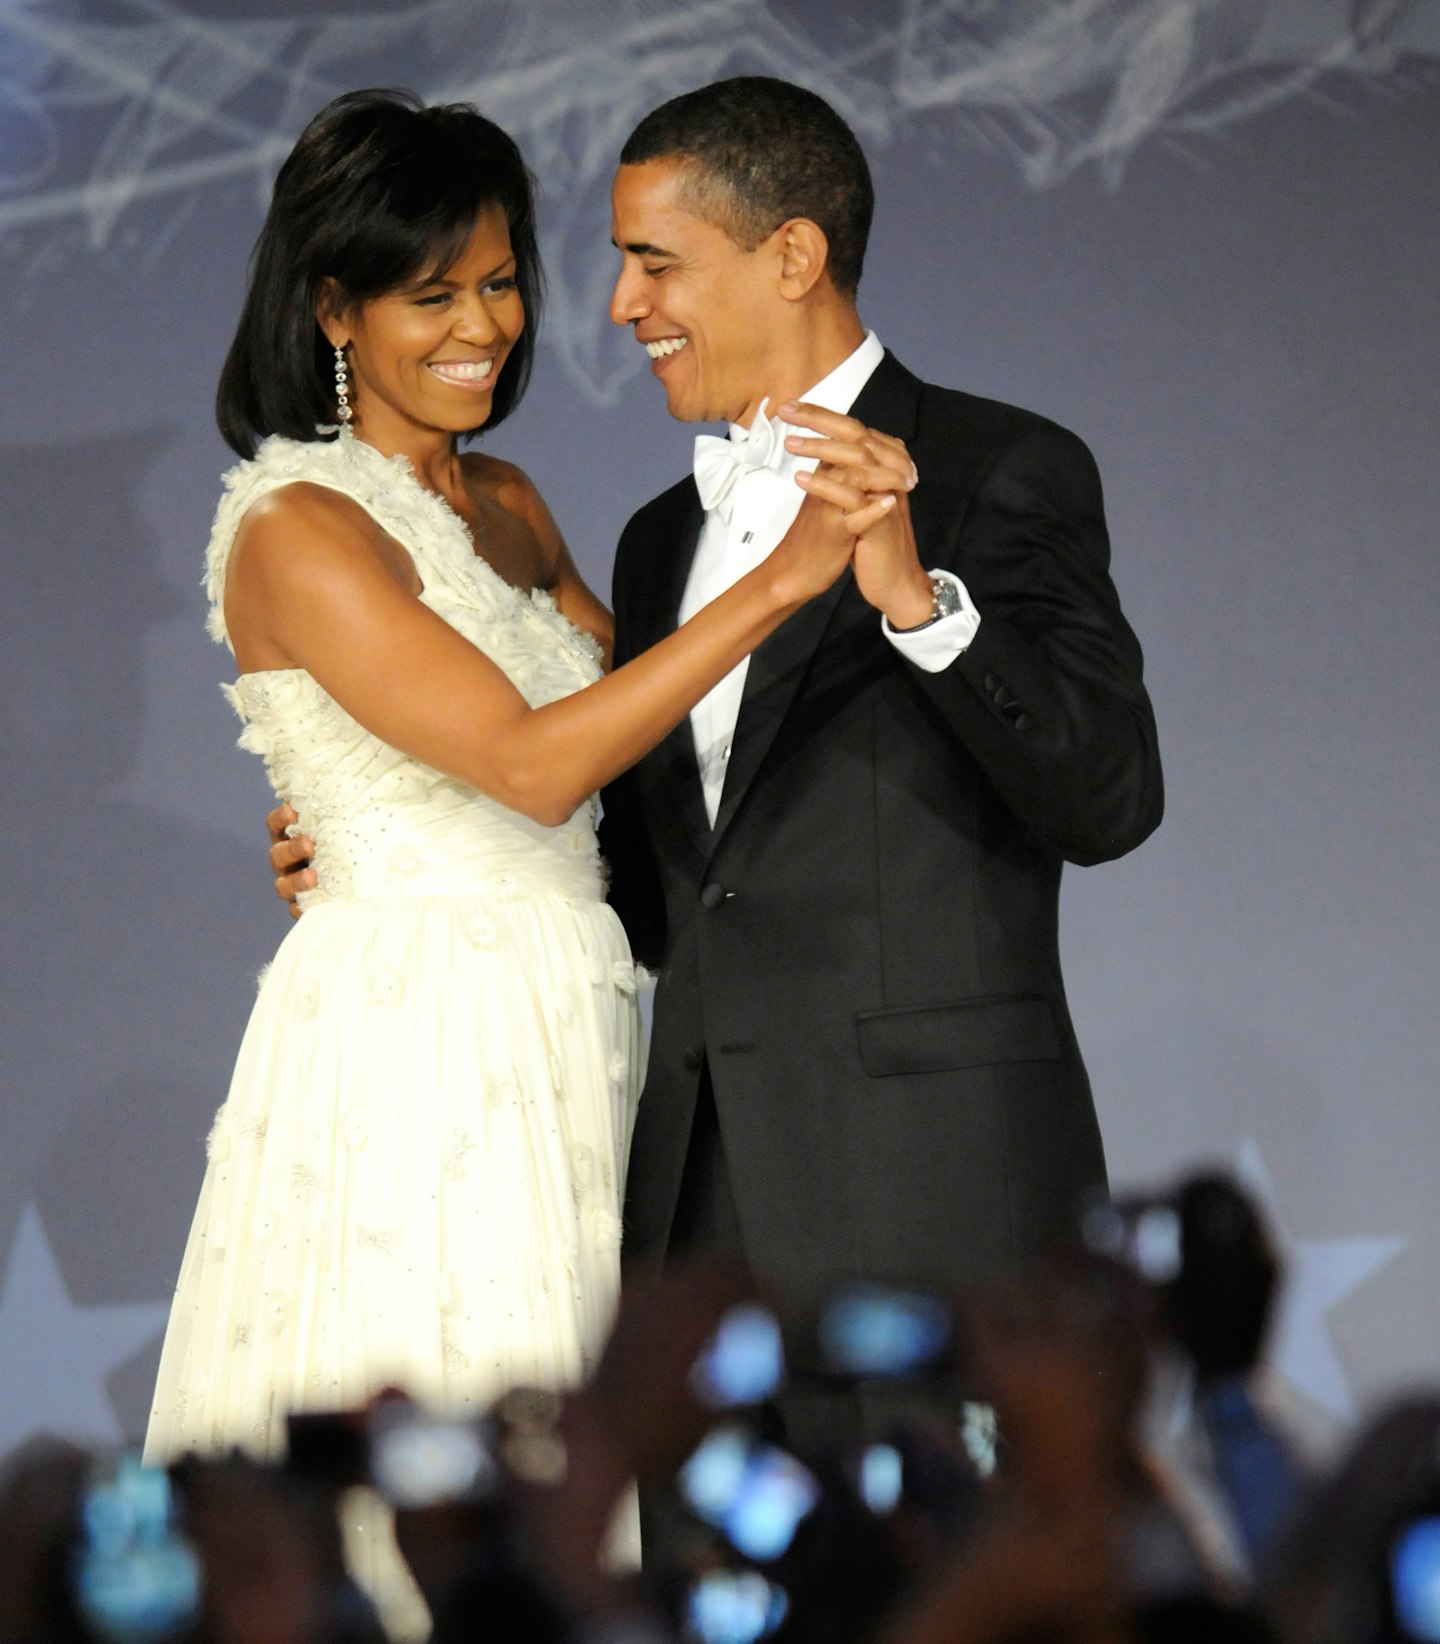 President Barack Obama and Michelle Obama at MTV and ServiceNation's "Be the Change: Live From The Inaugural Ball" at the Washington Hilton on January 20, 2009 in Washington, D.C.